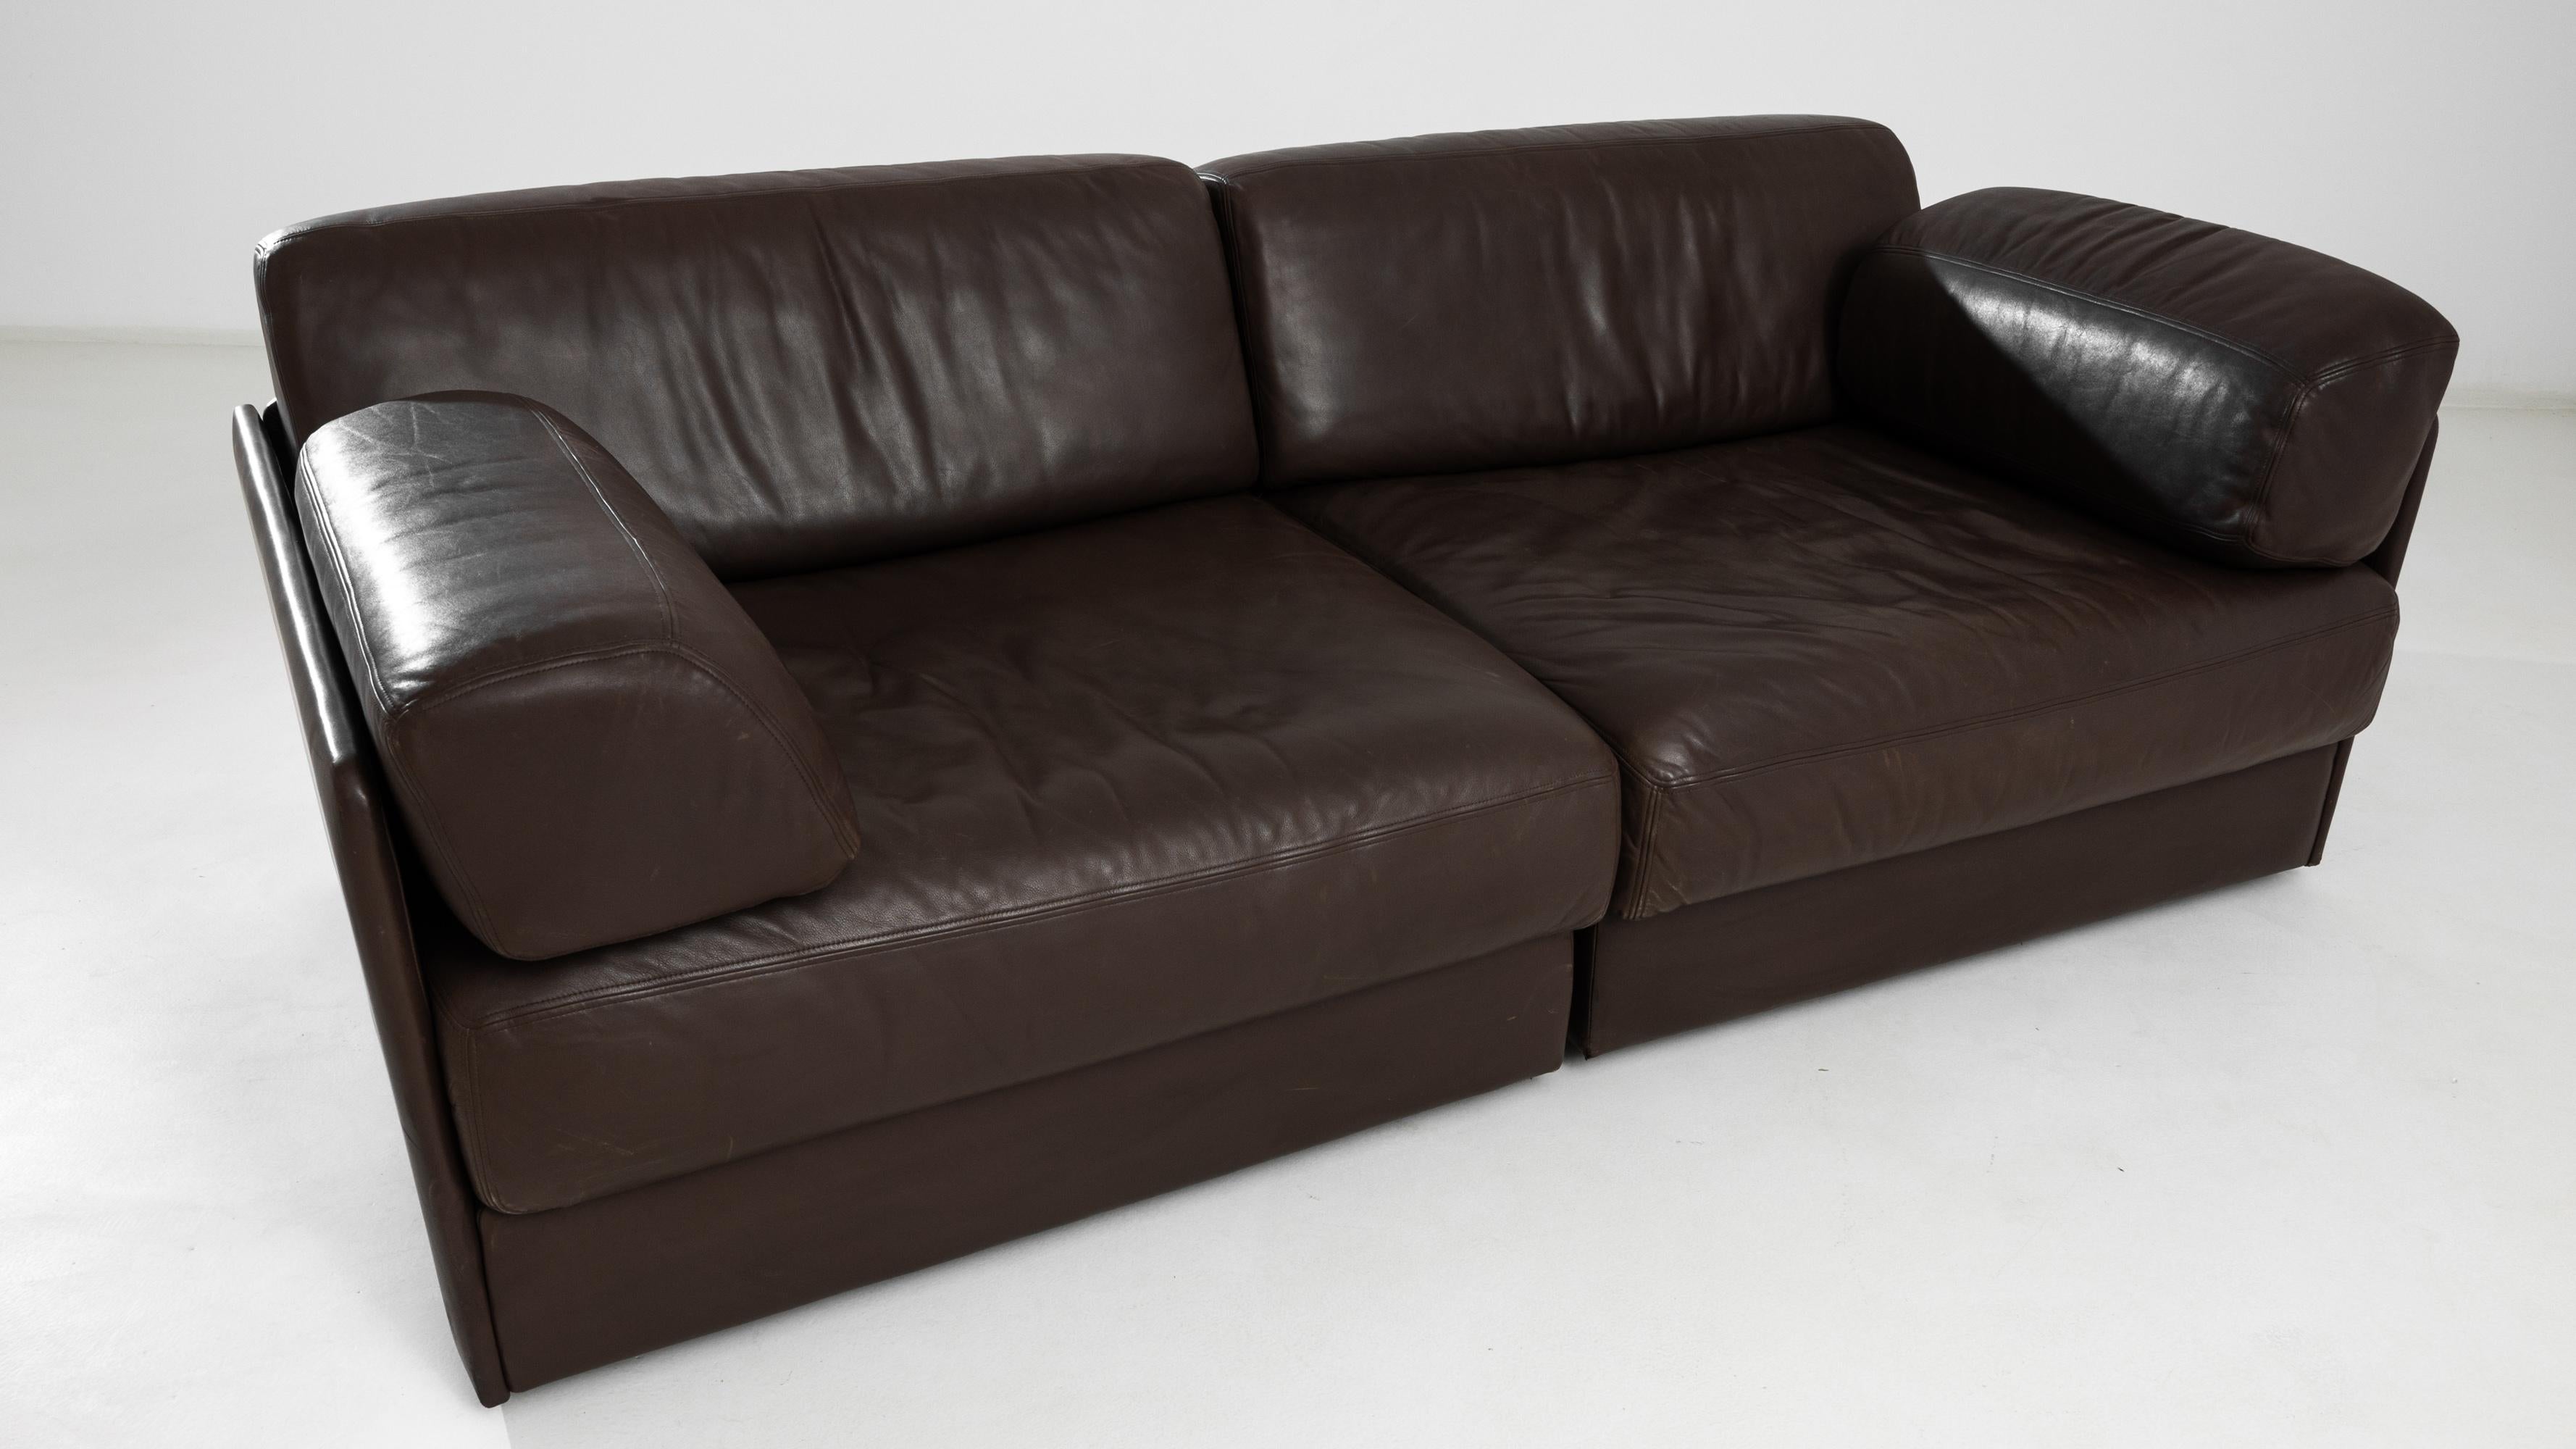 Late 20th Century 1970s Modular Leather Sofa DS76 by De Sede, a Pair